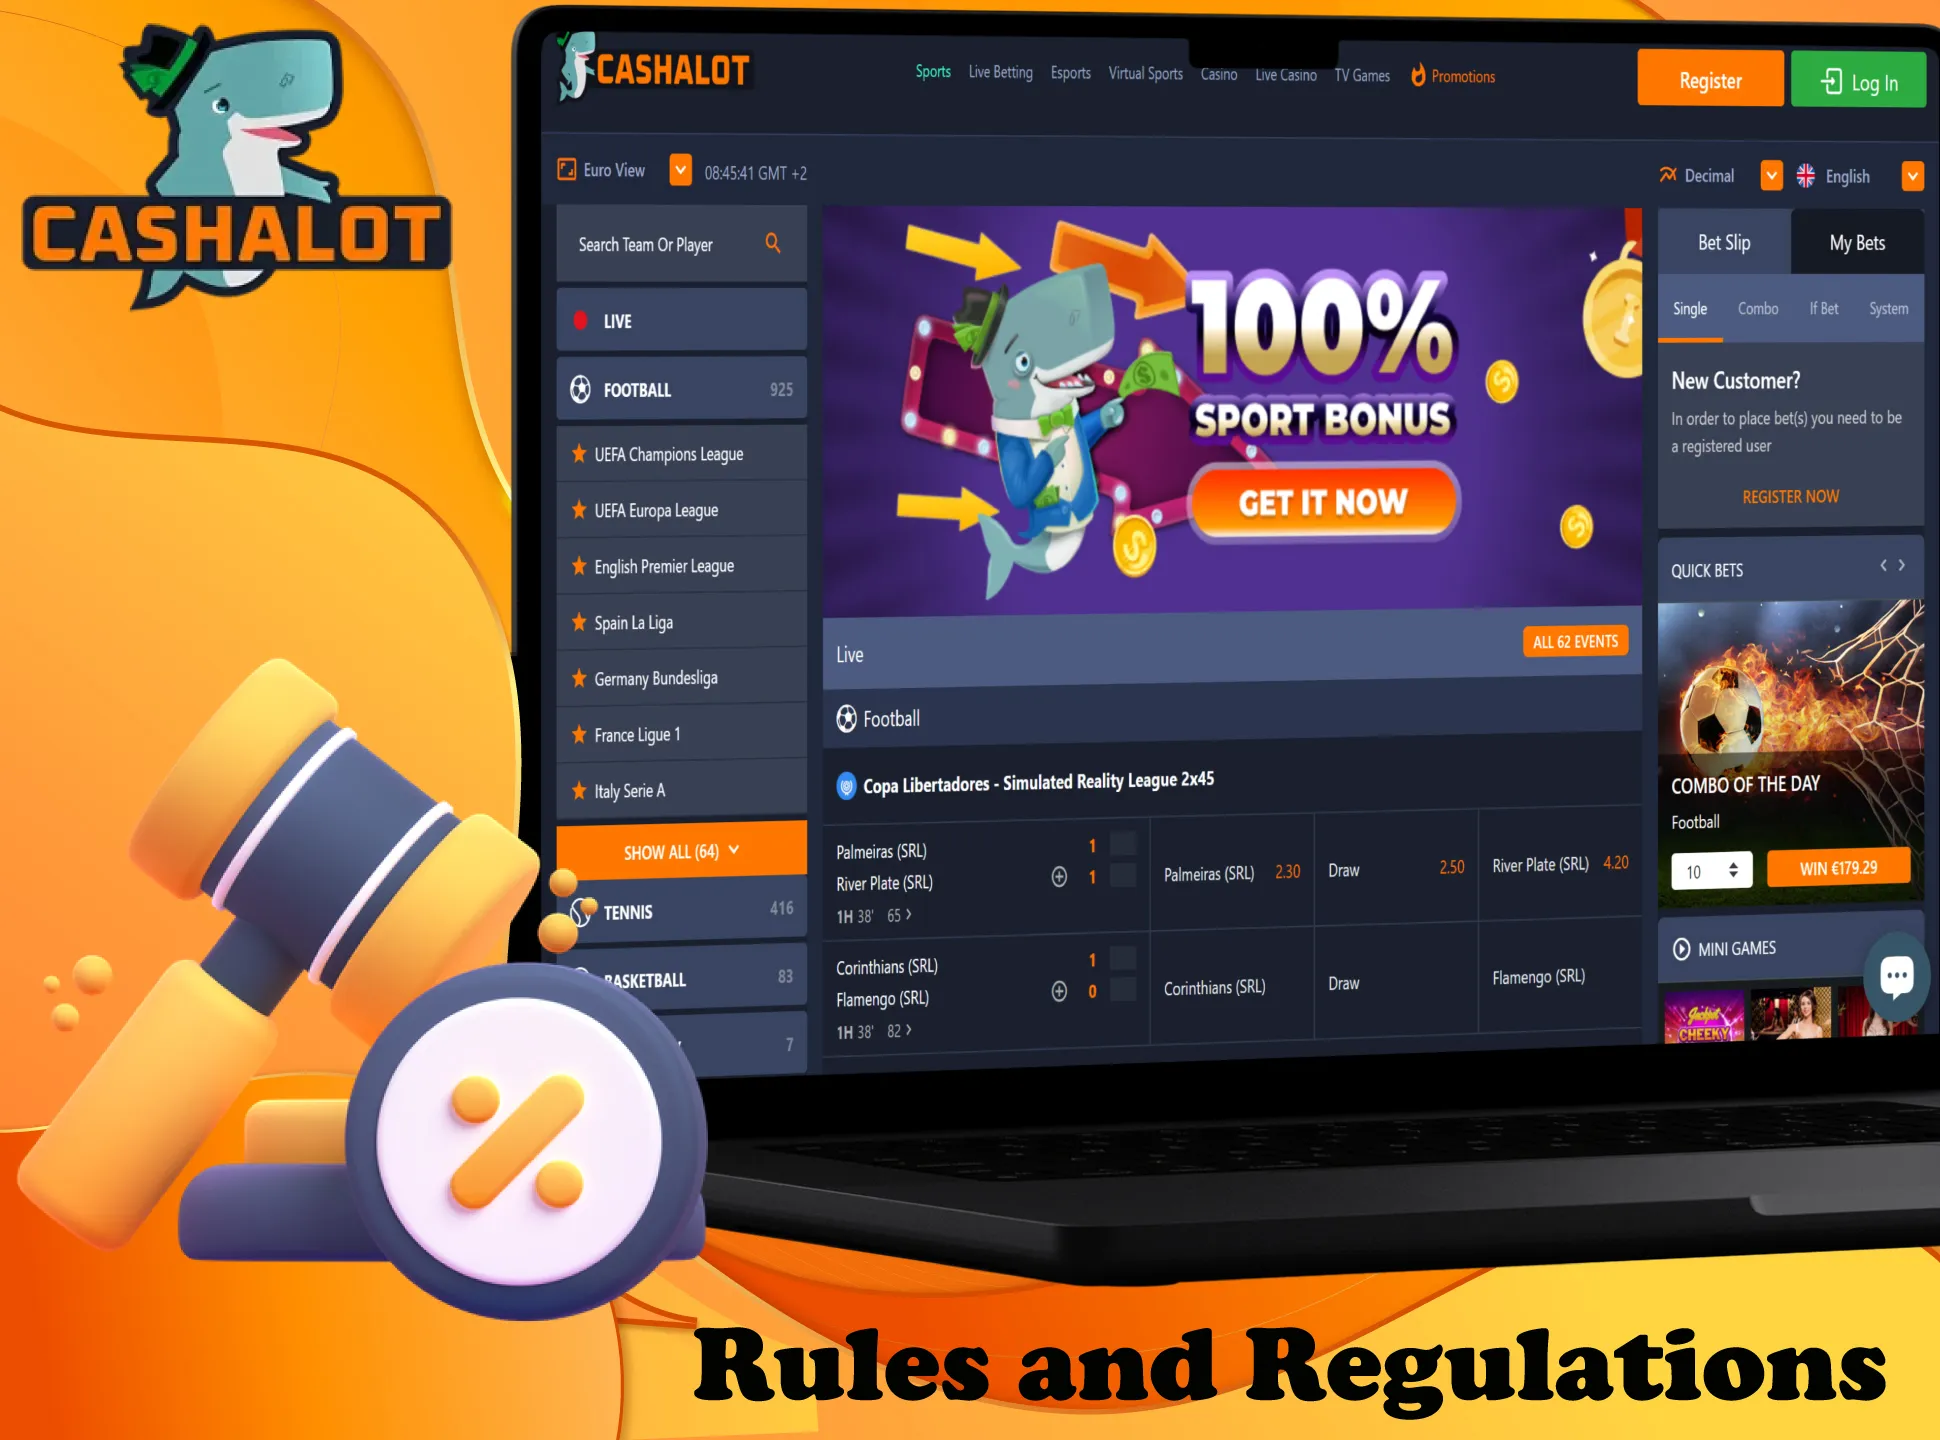 Follow Cashalot rules when you make a new bet.